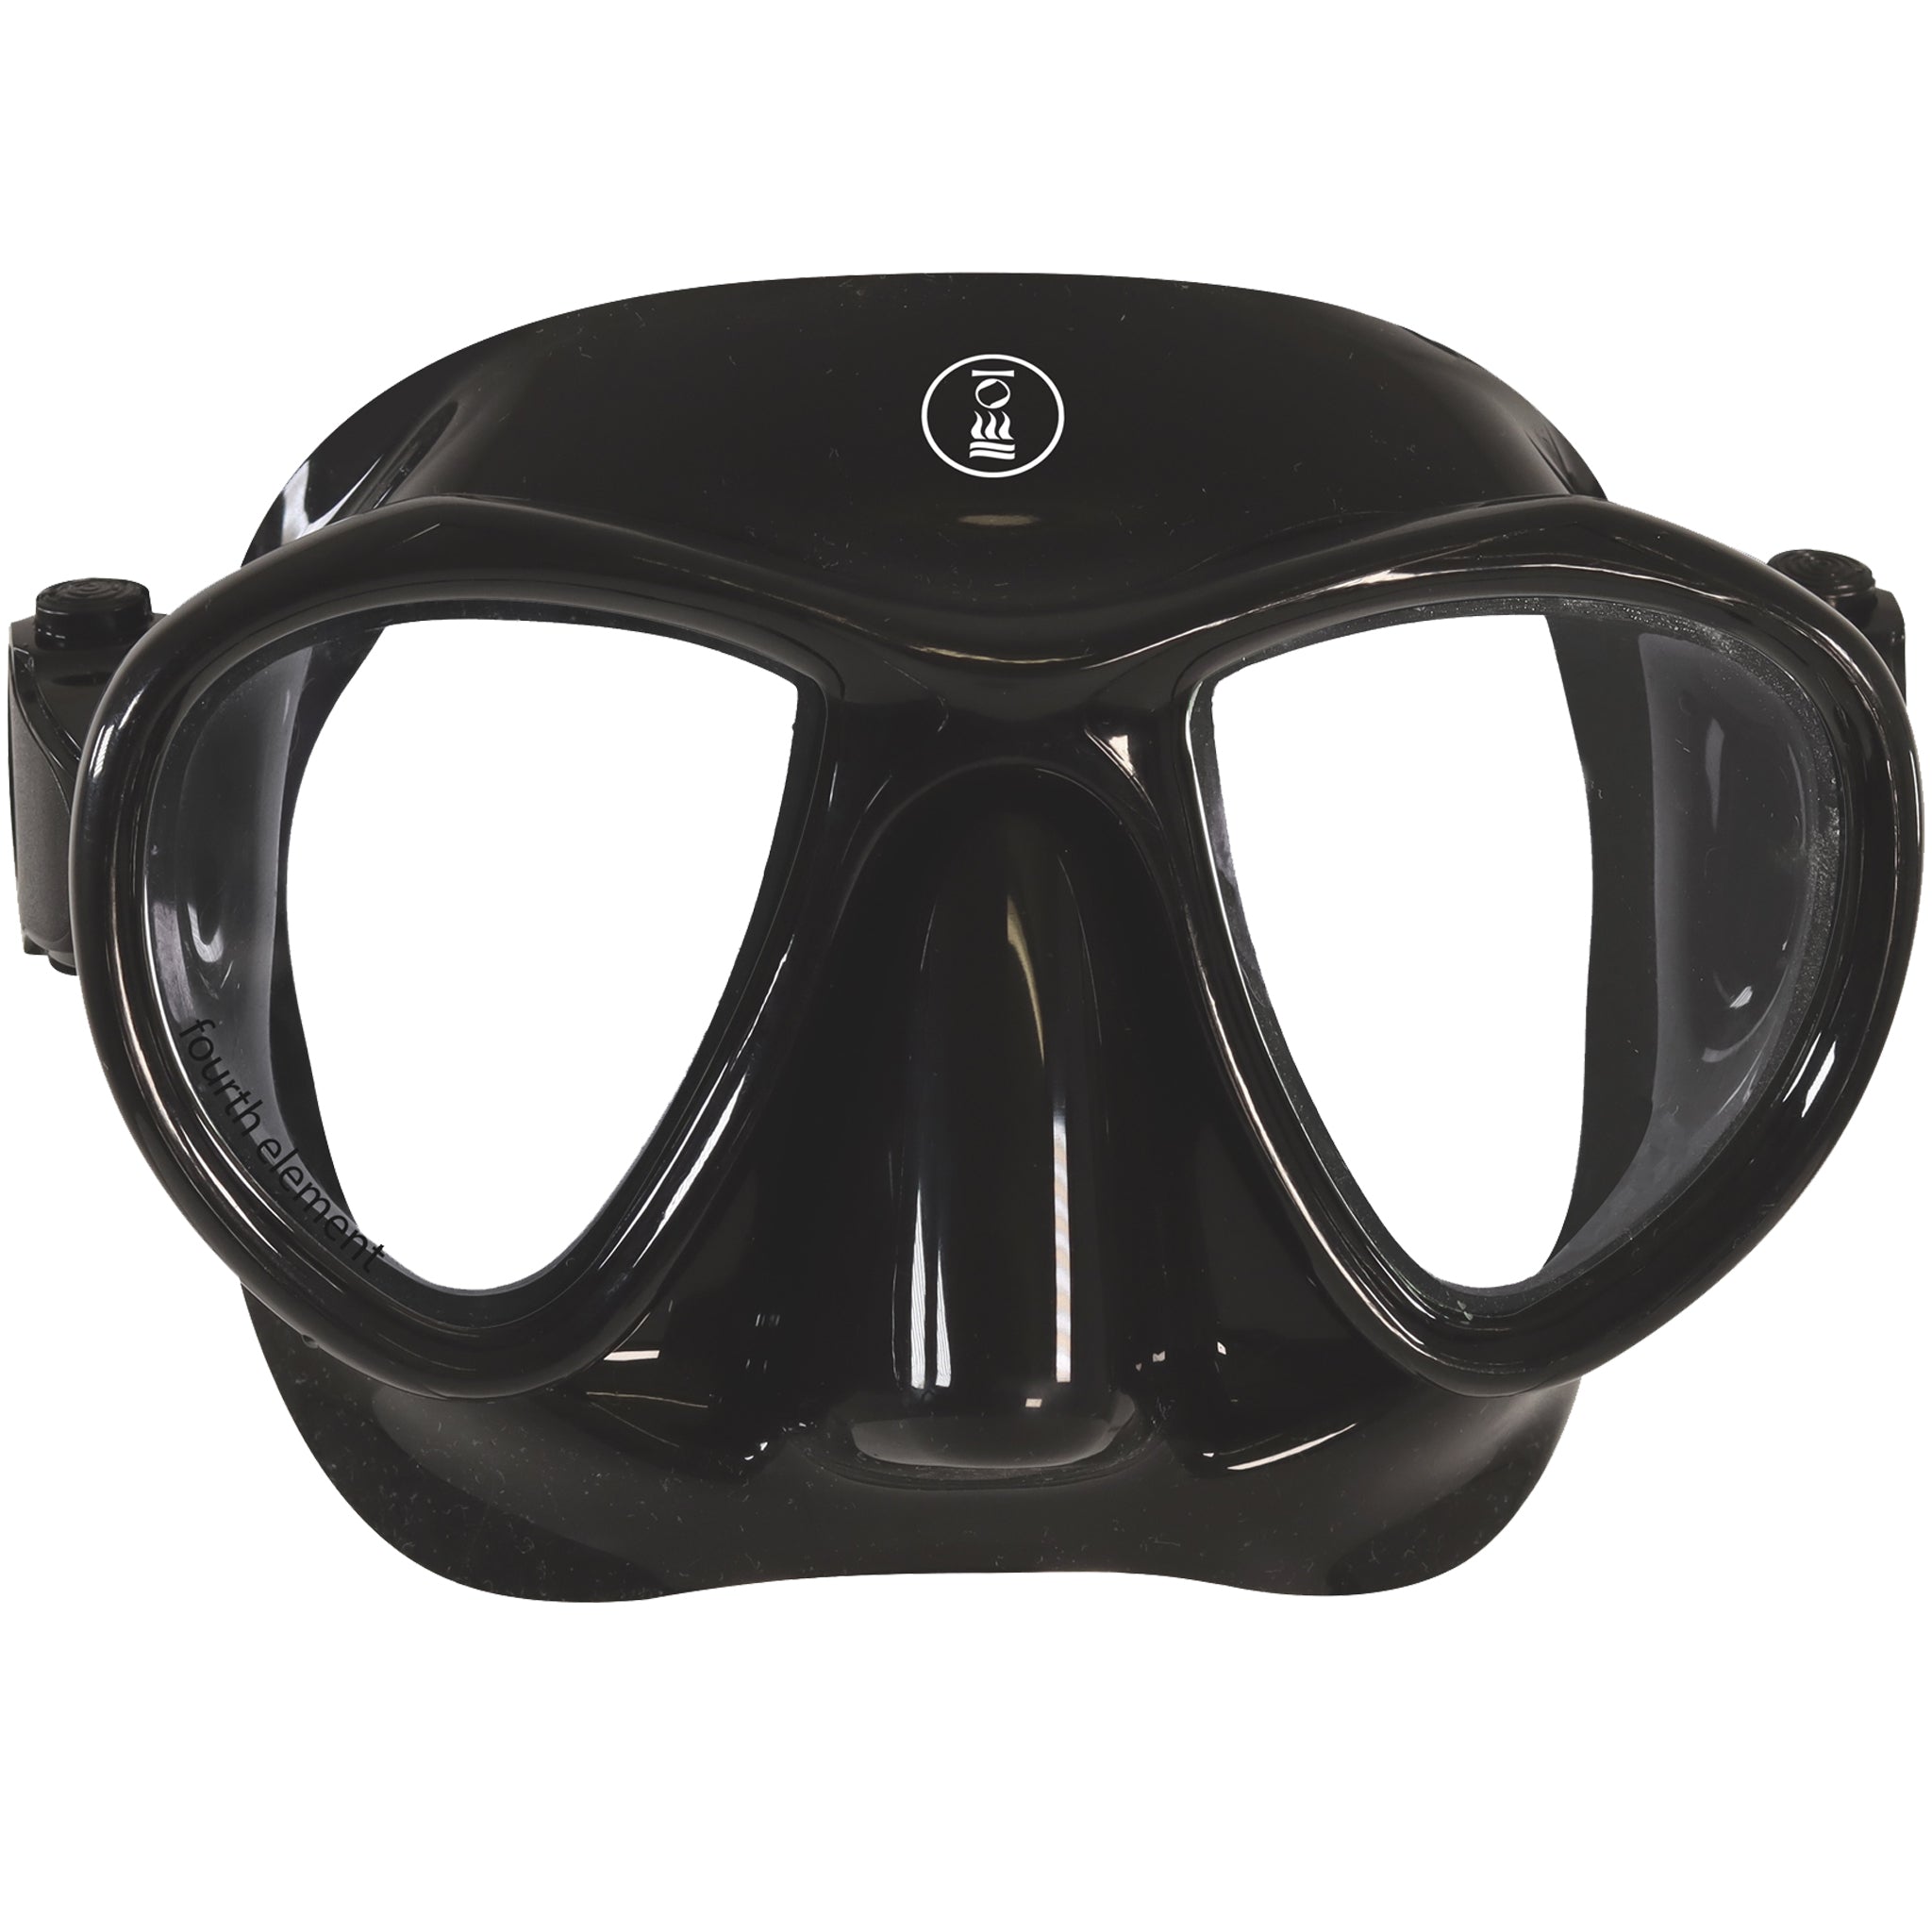 Fourth Element Aquanaut Mask for Diving & Freediving with Clarity Lens